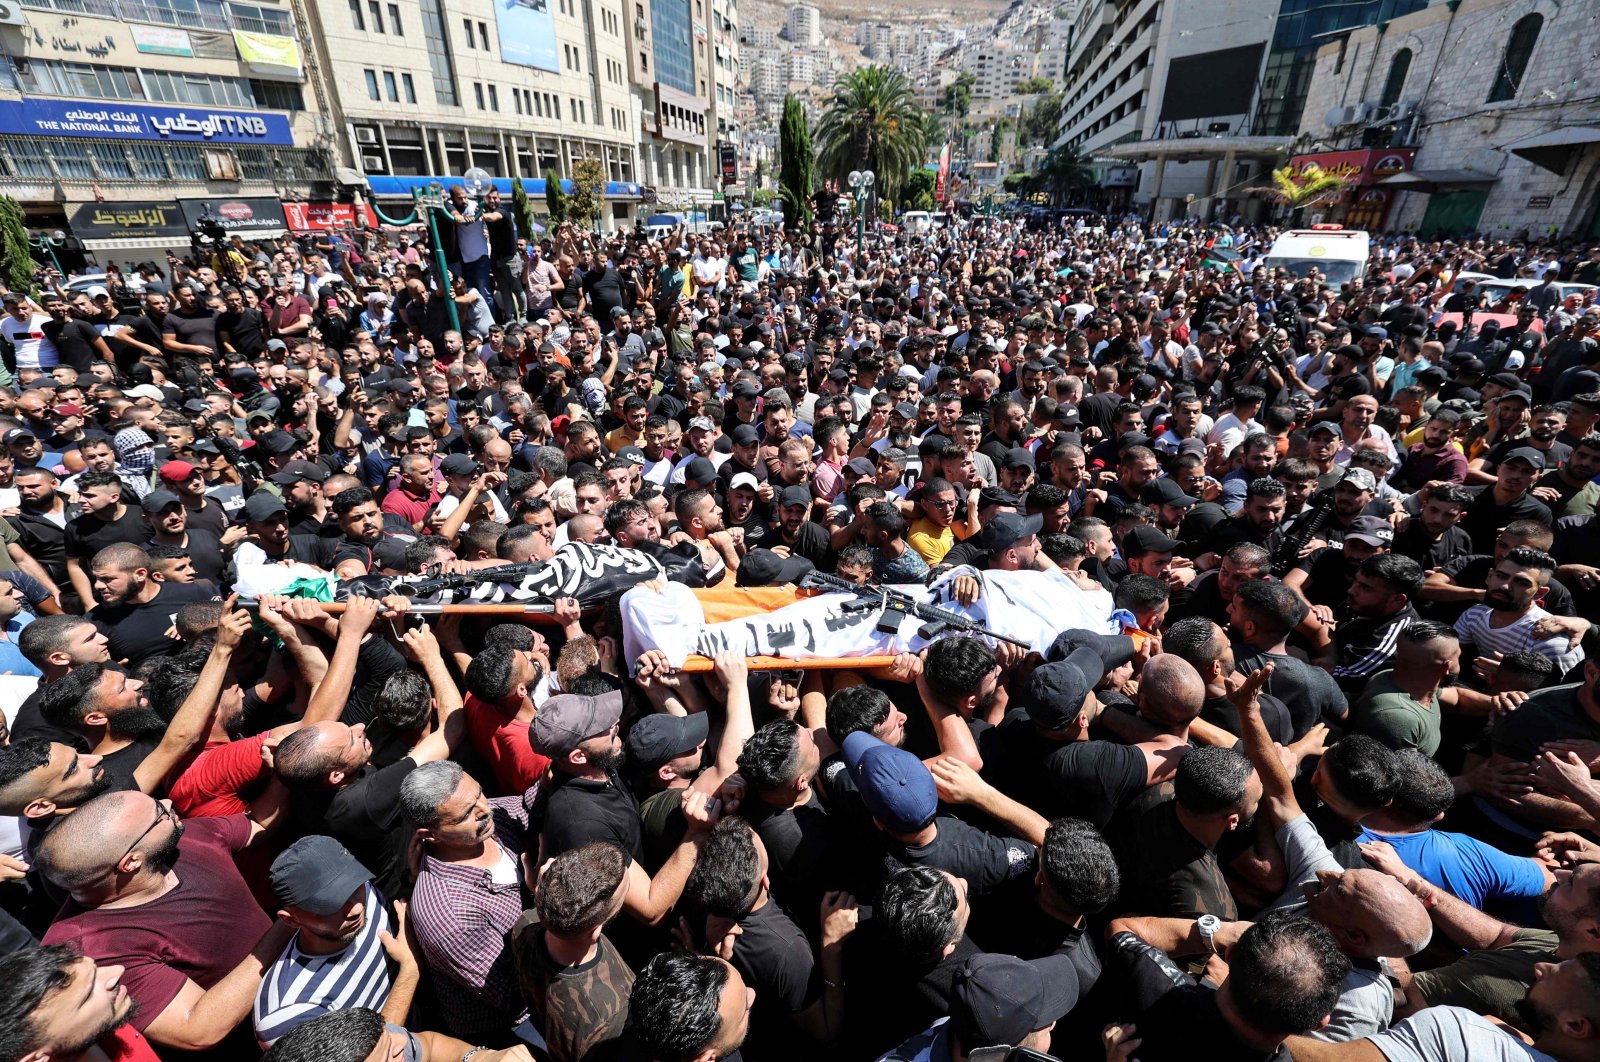 Mourners carry the bodies of two Palestinians killed by Israeli troops during their funeral procession in the West Bank city of Nablus, occupied Palestine, July 24, 2022. (AFP Photo)